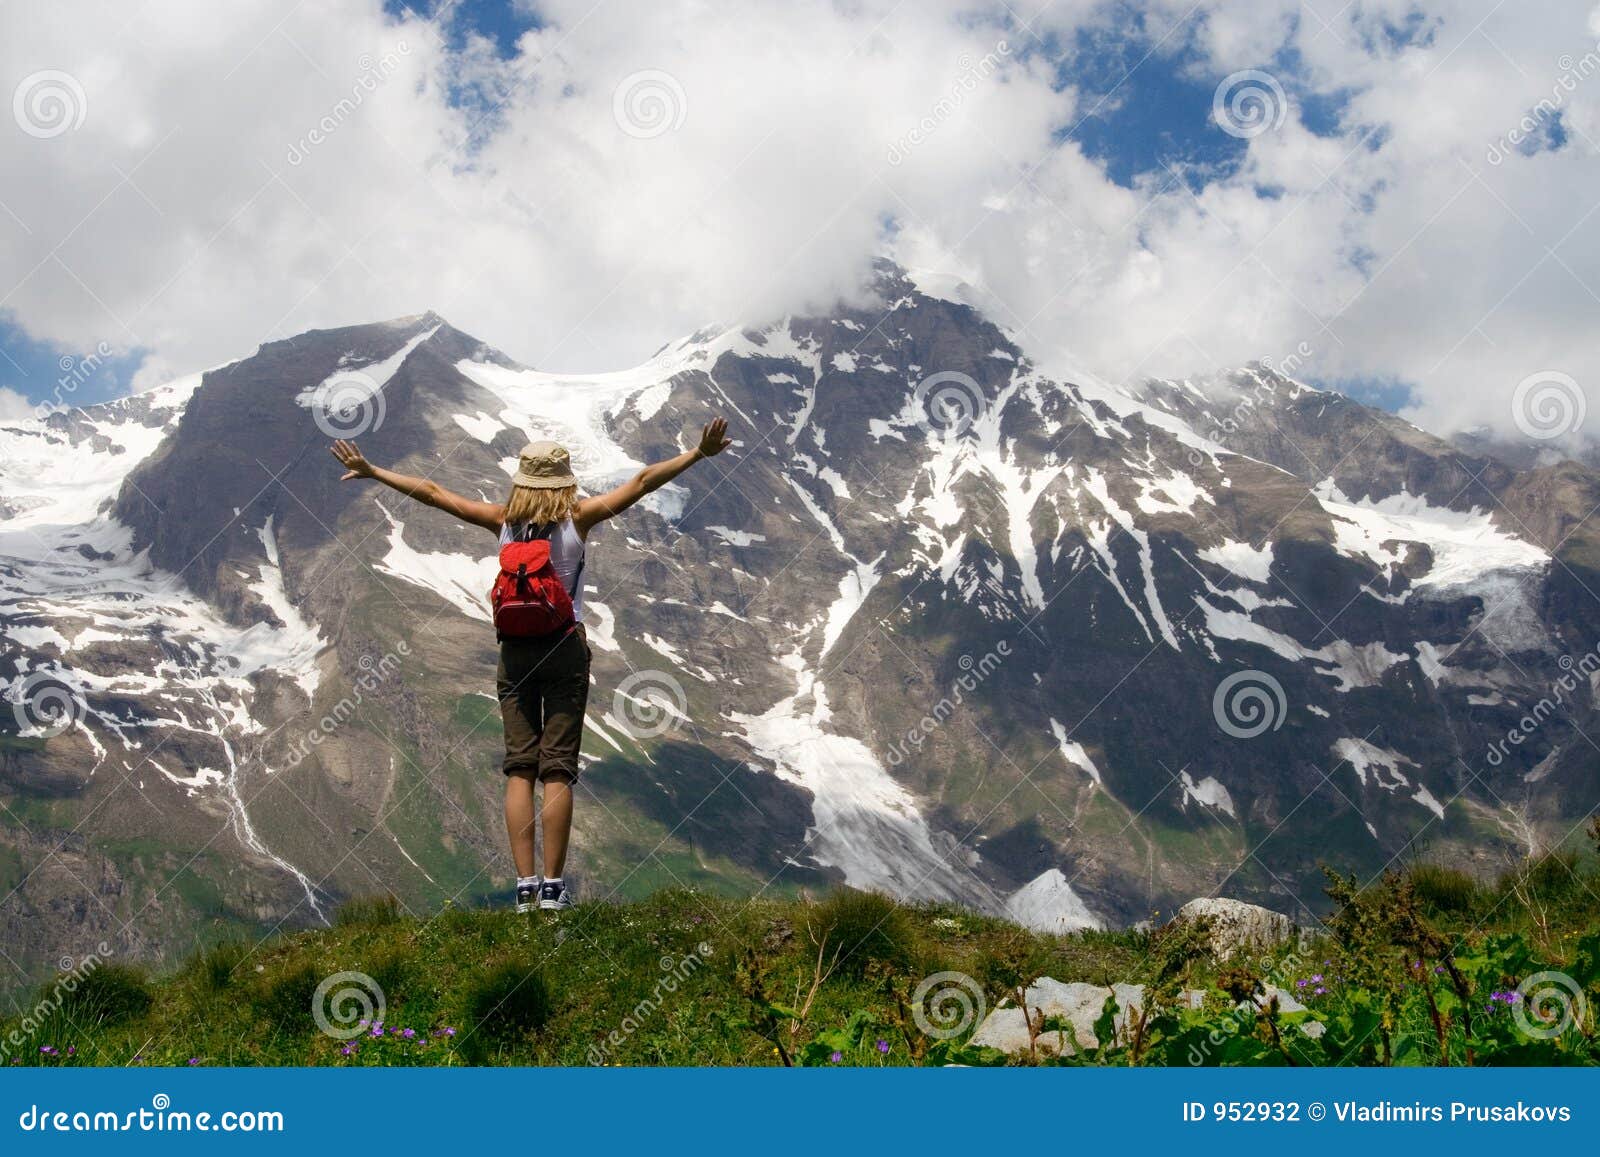 people in mountains victory, tourist hiking backpacker climbing, tourism concept